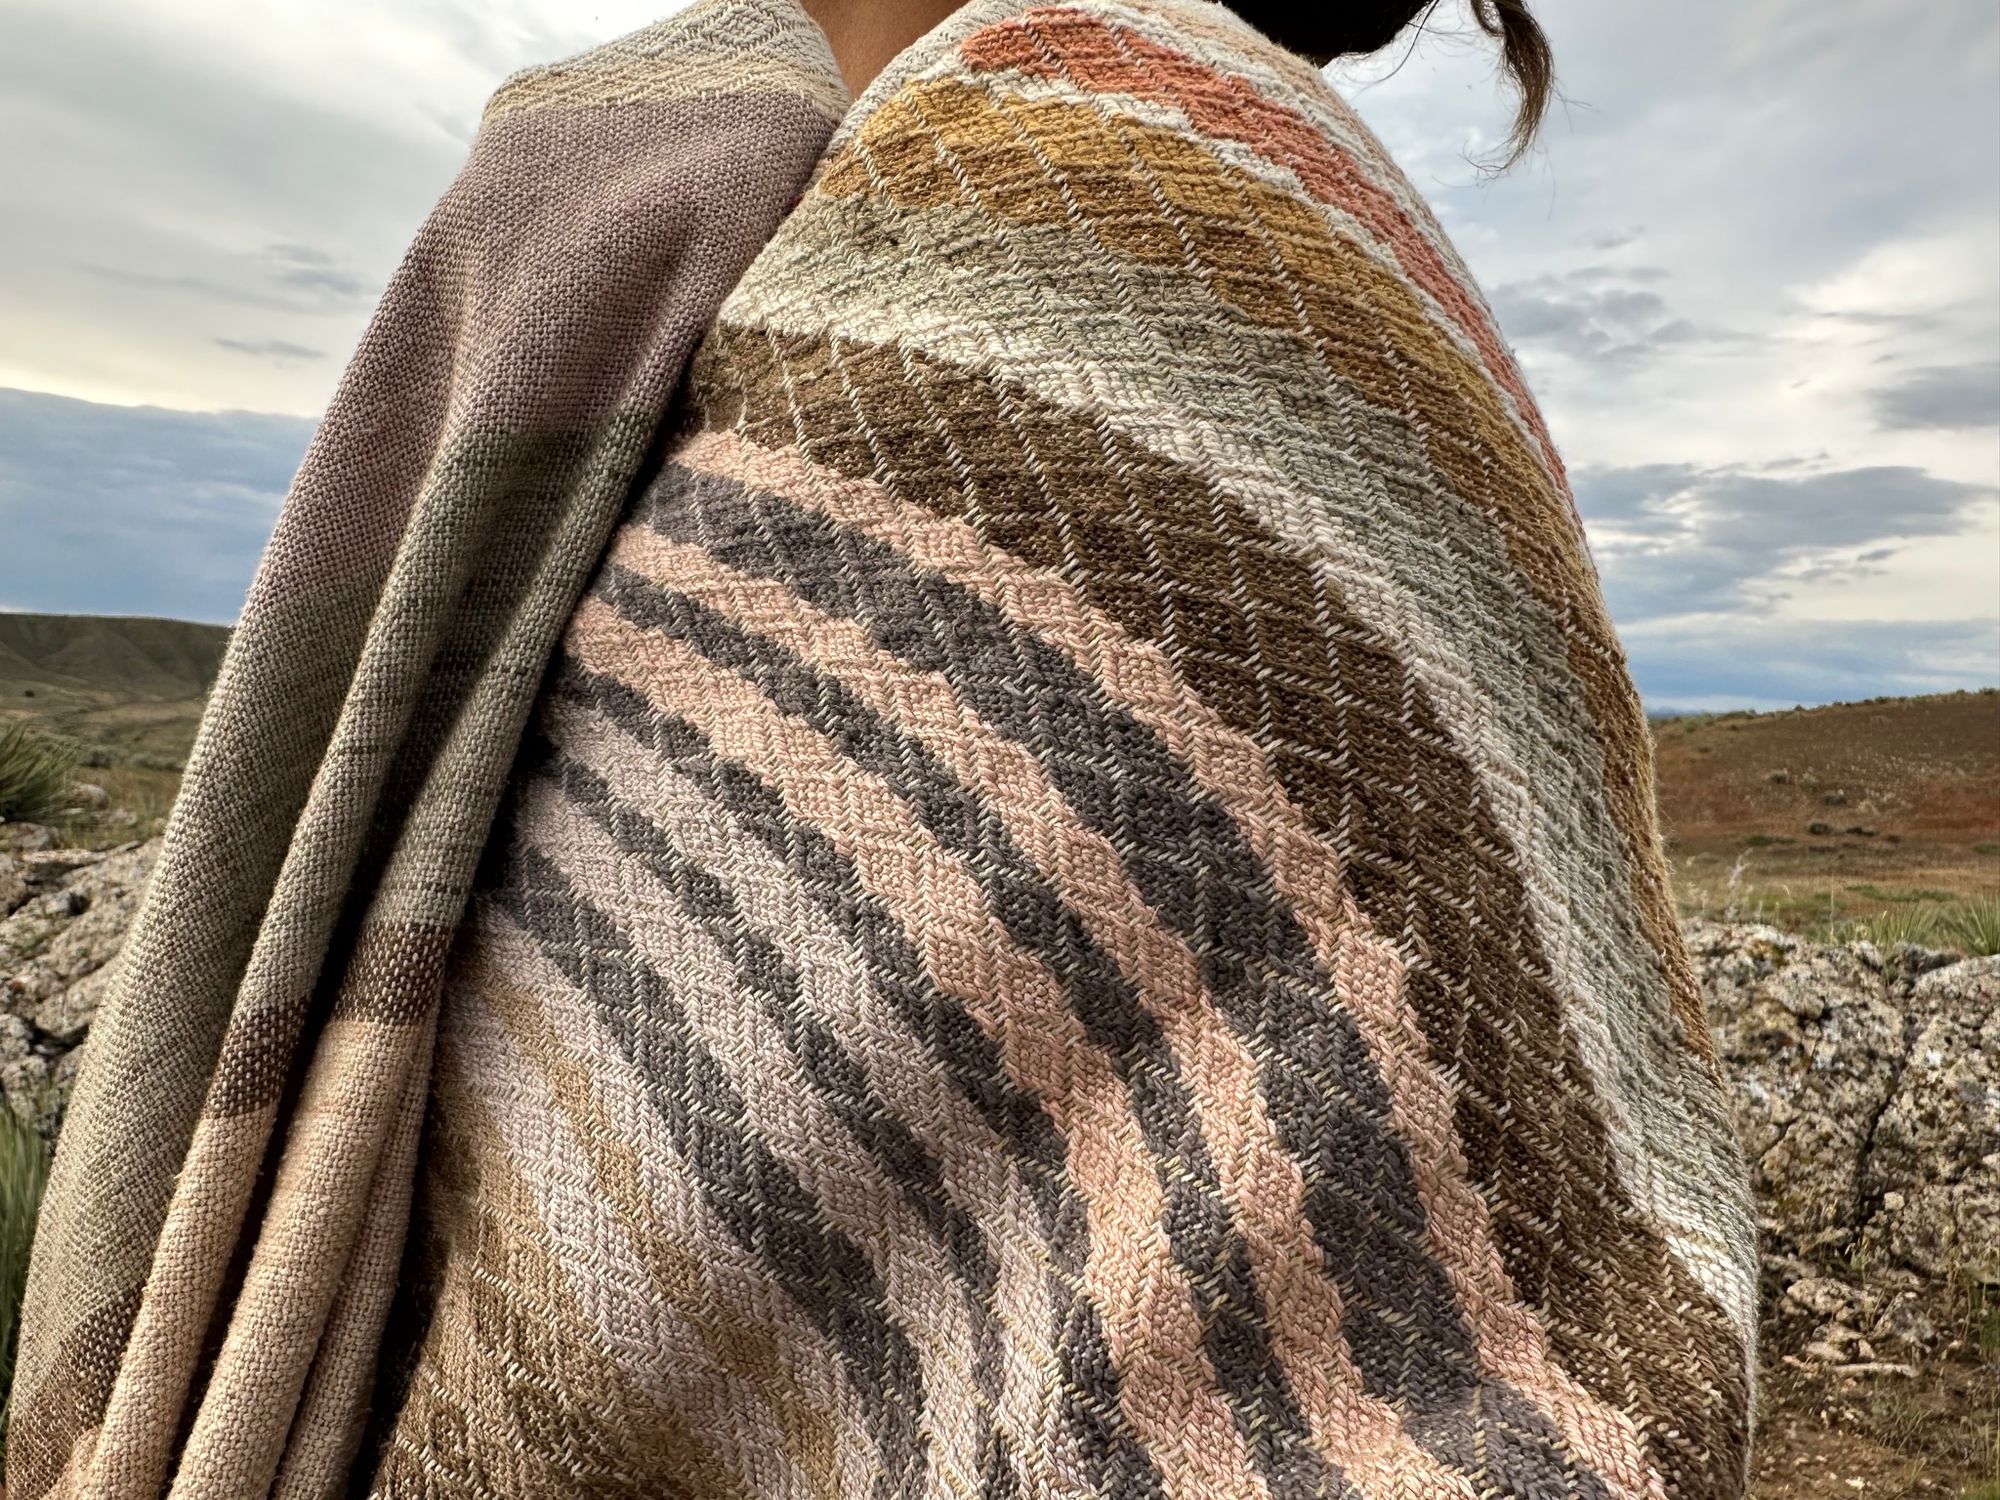 handwoven fabric of Naturally dyed subtle rainbow hues with a diamond texture pattern lays on a wooden floora woman wears a shawl of handwoven fabric of Naturally dyed subtle rainbow hues with a diamond texture pattern in a mountain landscape